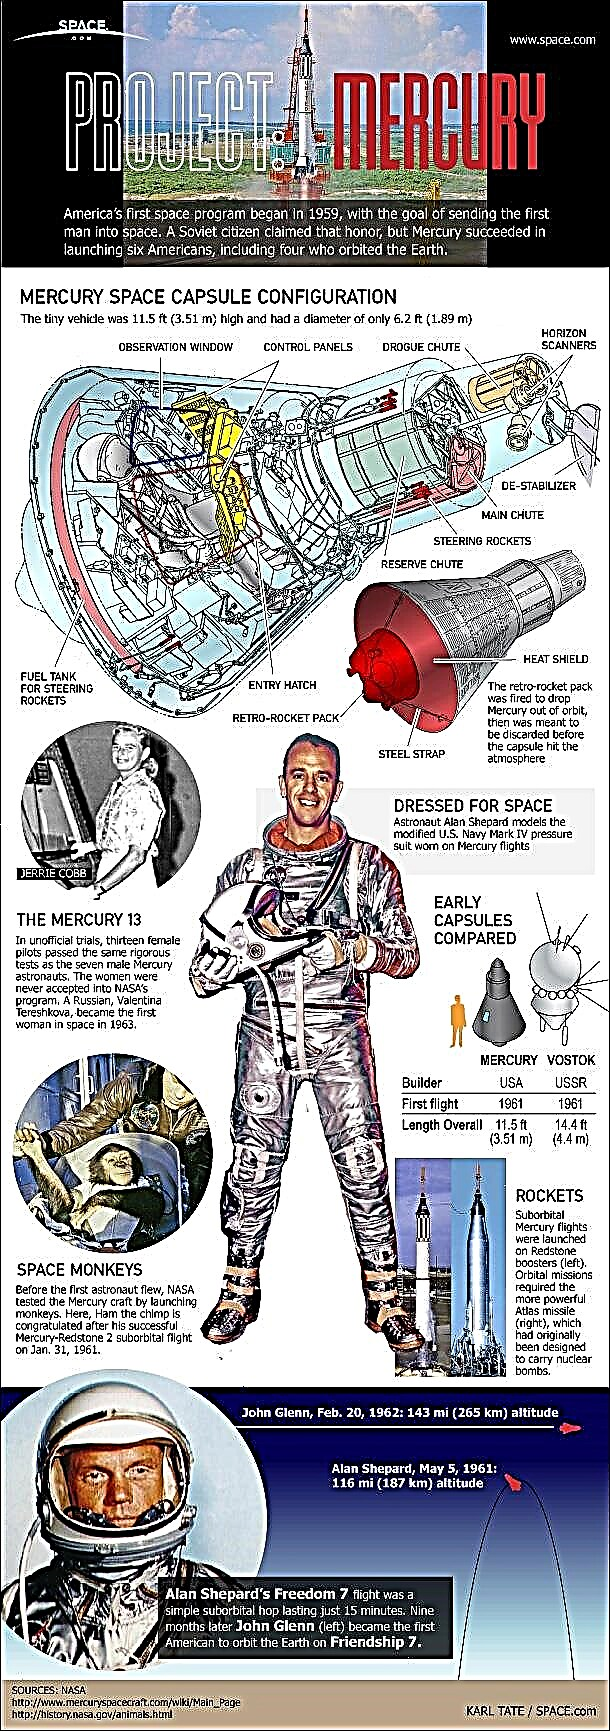 Project Mercury: America's 1st Manned Space Program